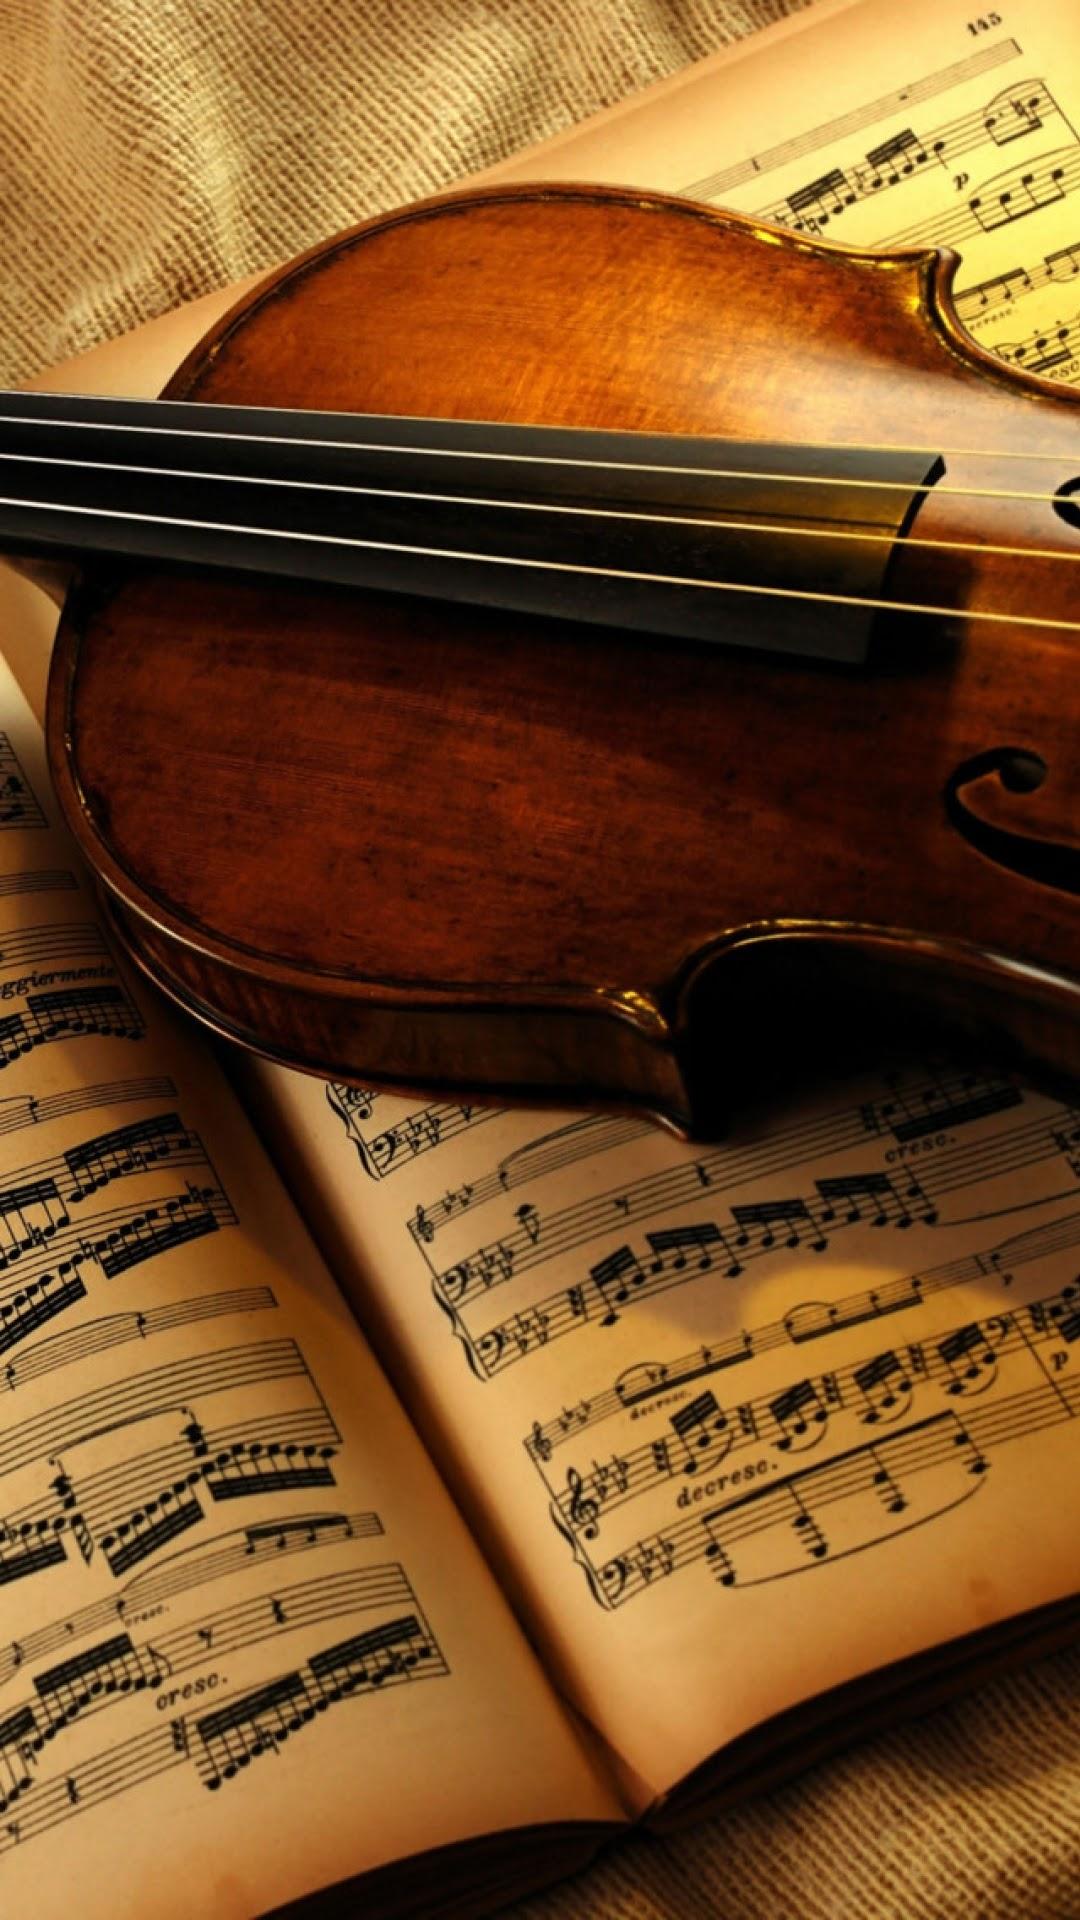 Android Best Wallpaper: Violin and Music Notation Android Best